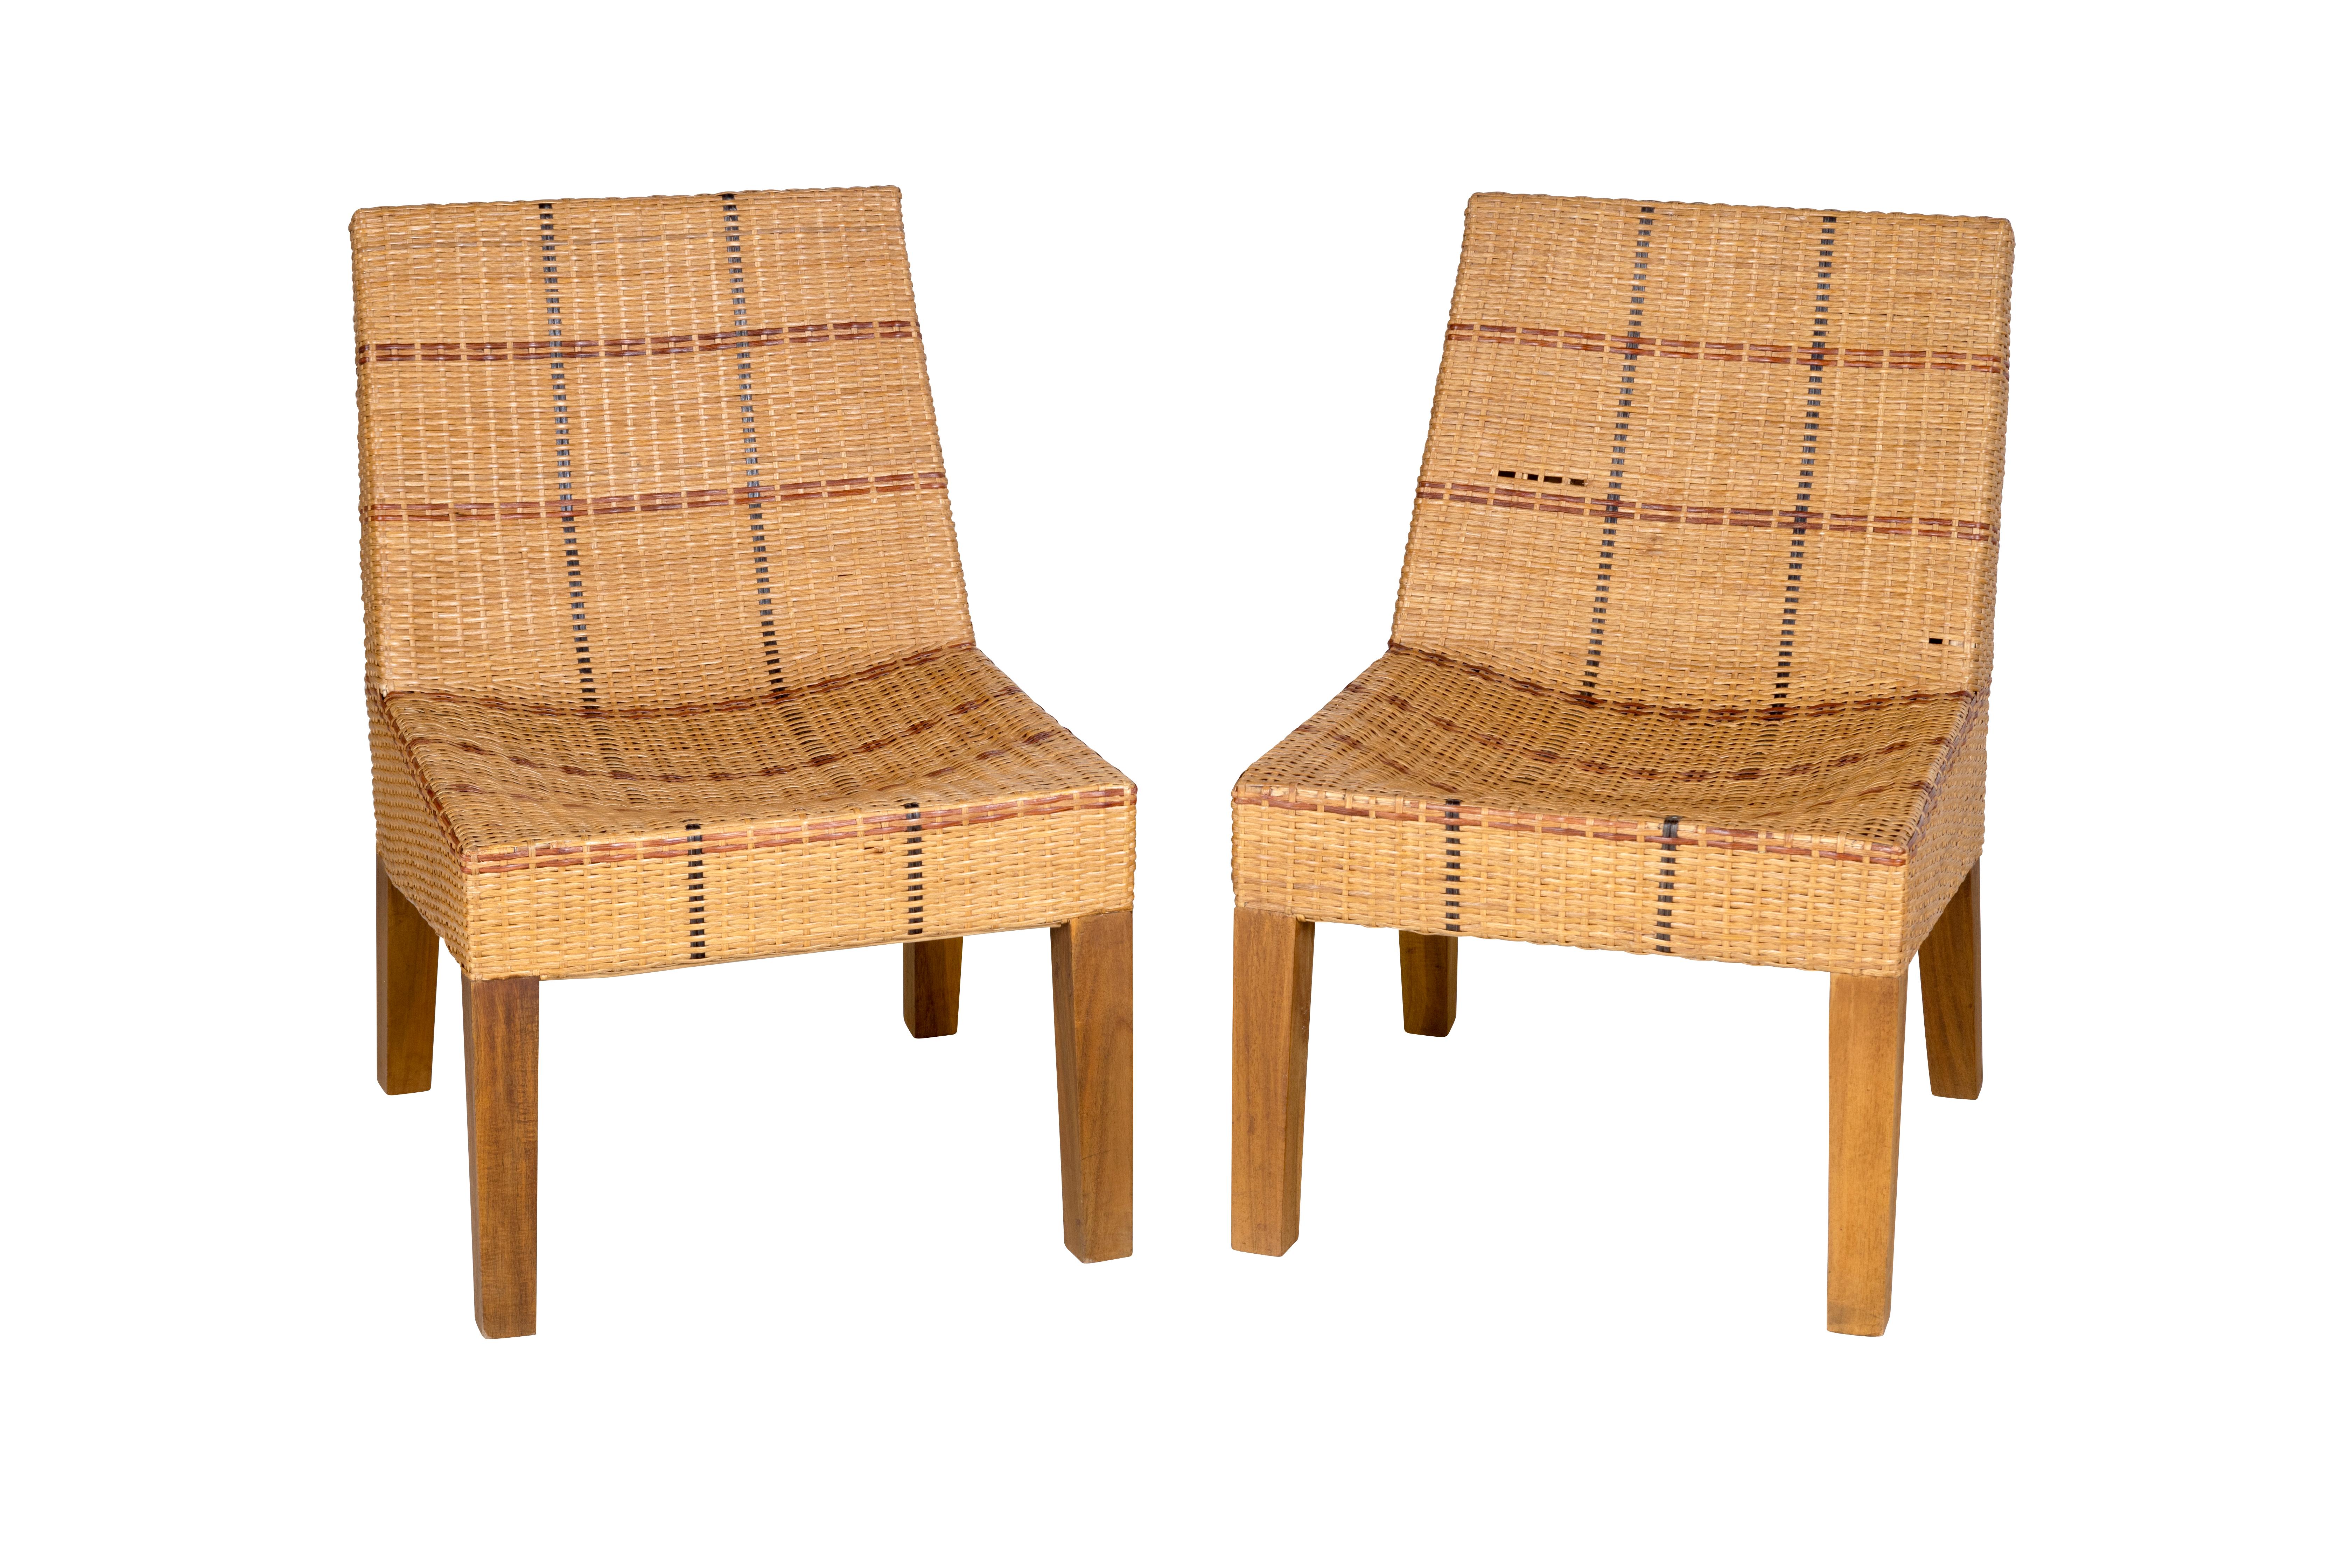 Pair of vintage 1970s chairs and ottoman set. Hand-woven tri-tone rattan. Some holes and wear in the rattan.

The piece is a part of our one-of-a-kind collection, Le Monde. Exclusive to us. 

Globally curated by Brendan Bass, Le Monde furniture